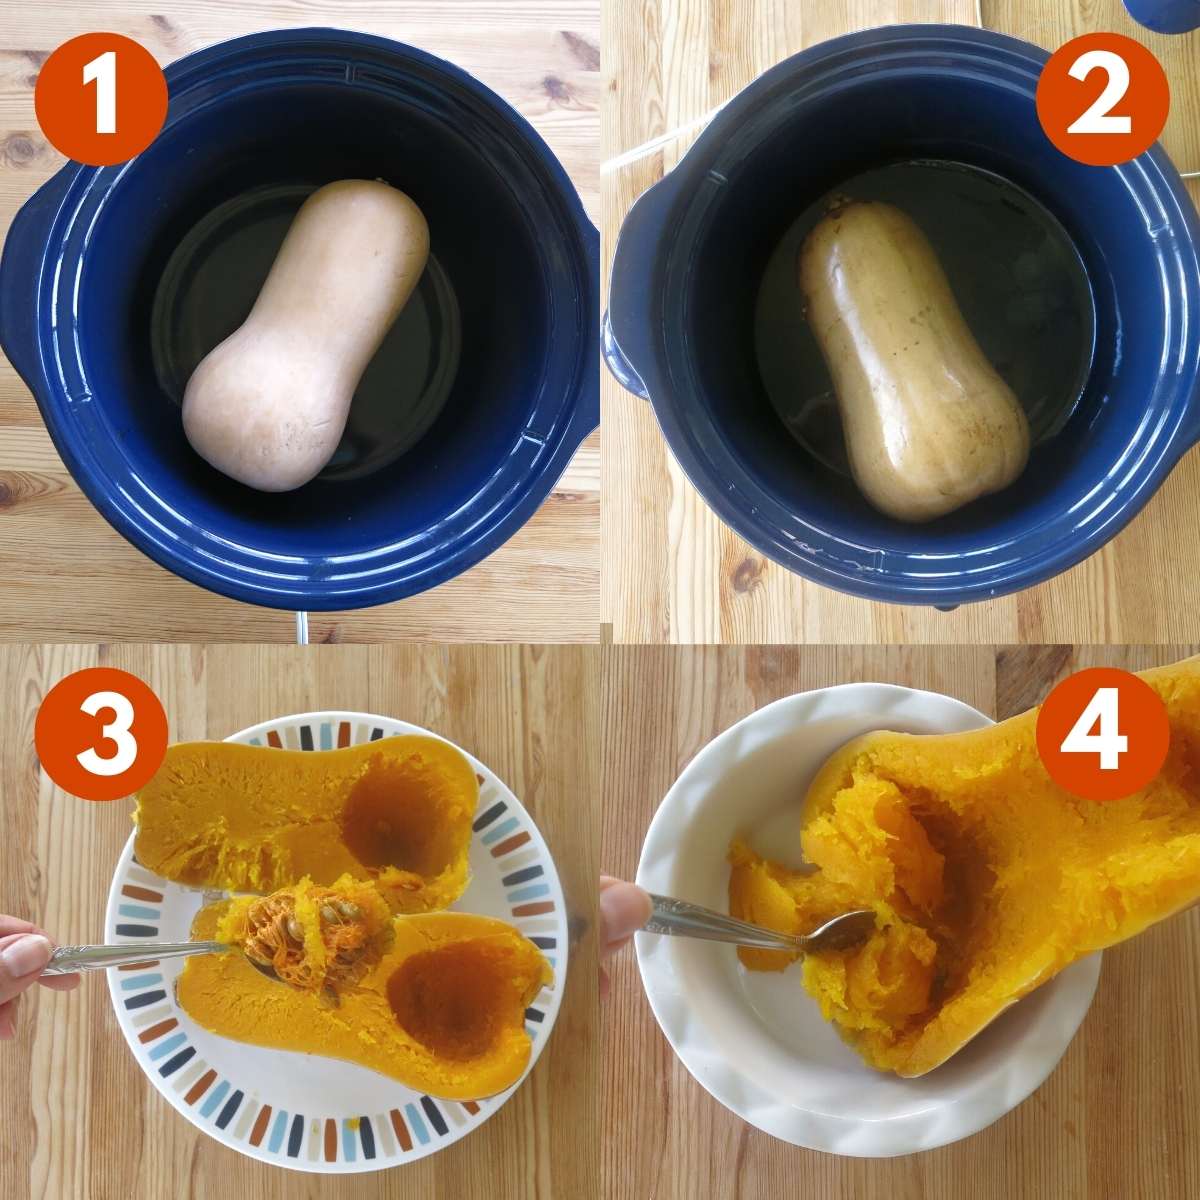 Collage of steps to cook butternut squash whole in a crock-pot. 1) Uncooked squash in slow cooker. 2) Cooked squash in slow cooker. 3) Cooked squash cooked in half with seeds being removed. 4) Flesh being scraped from skin.